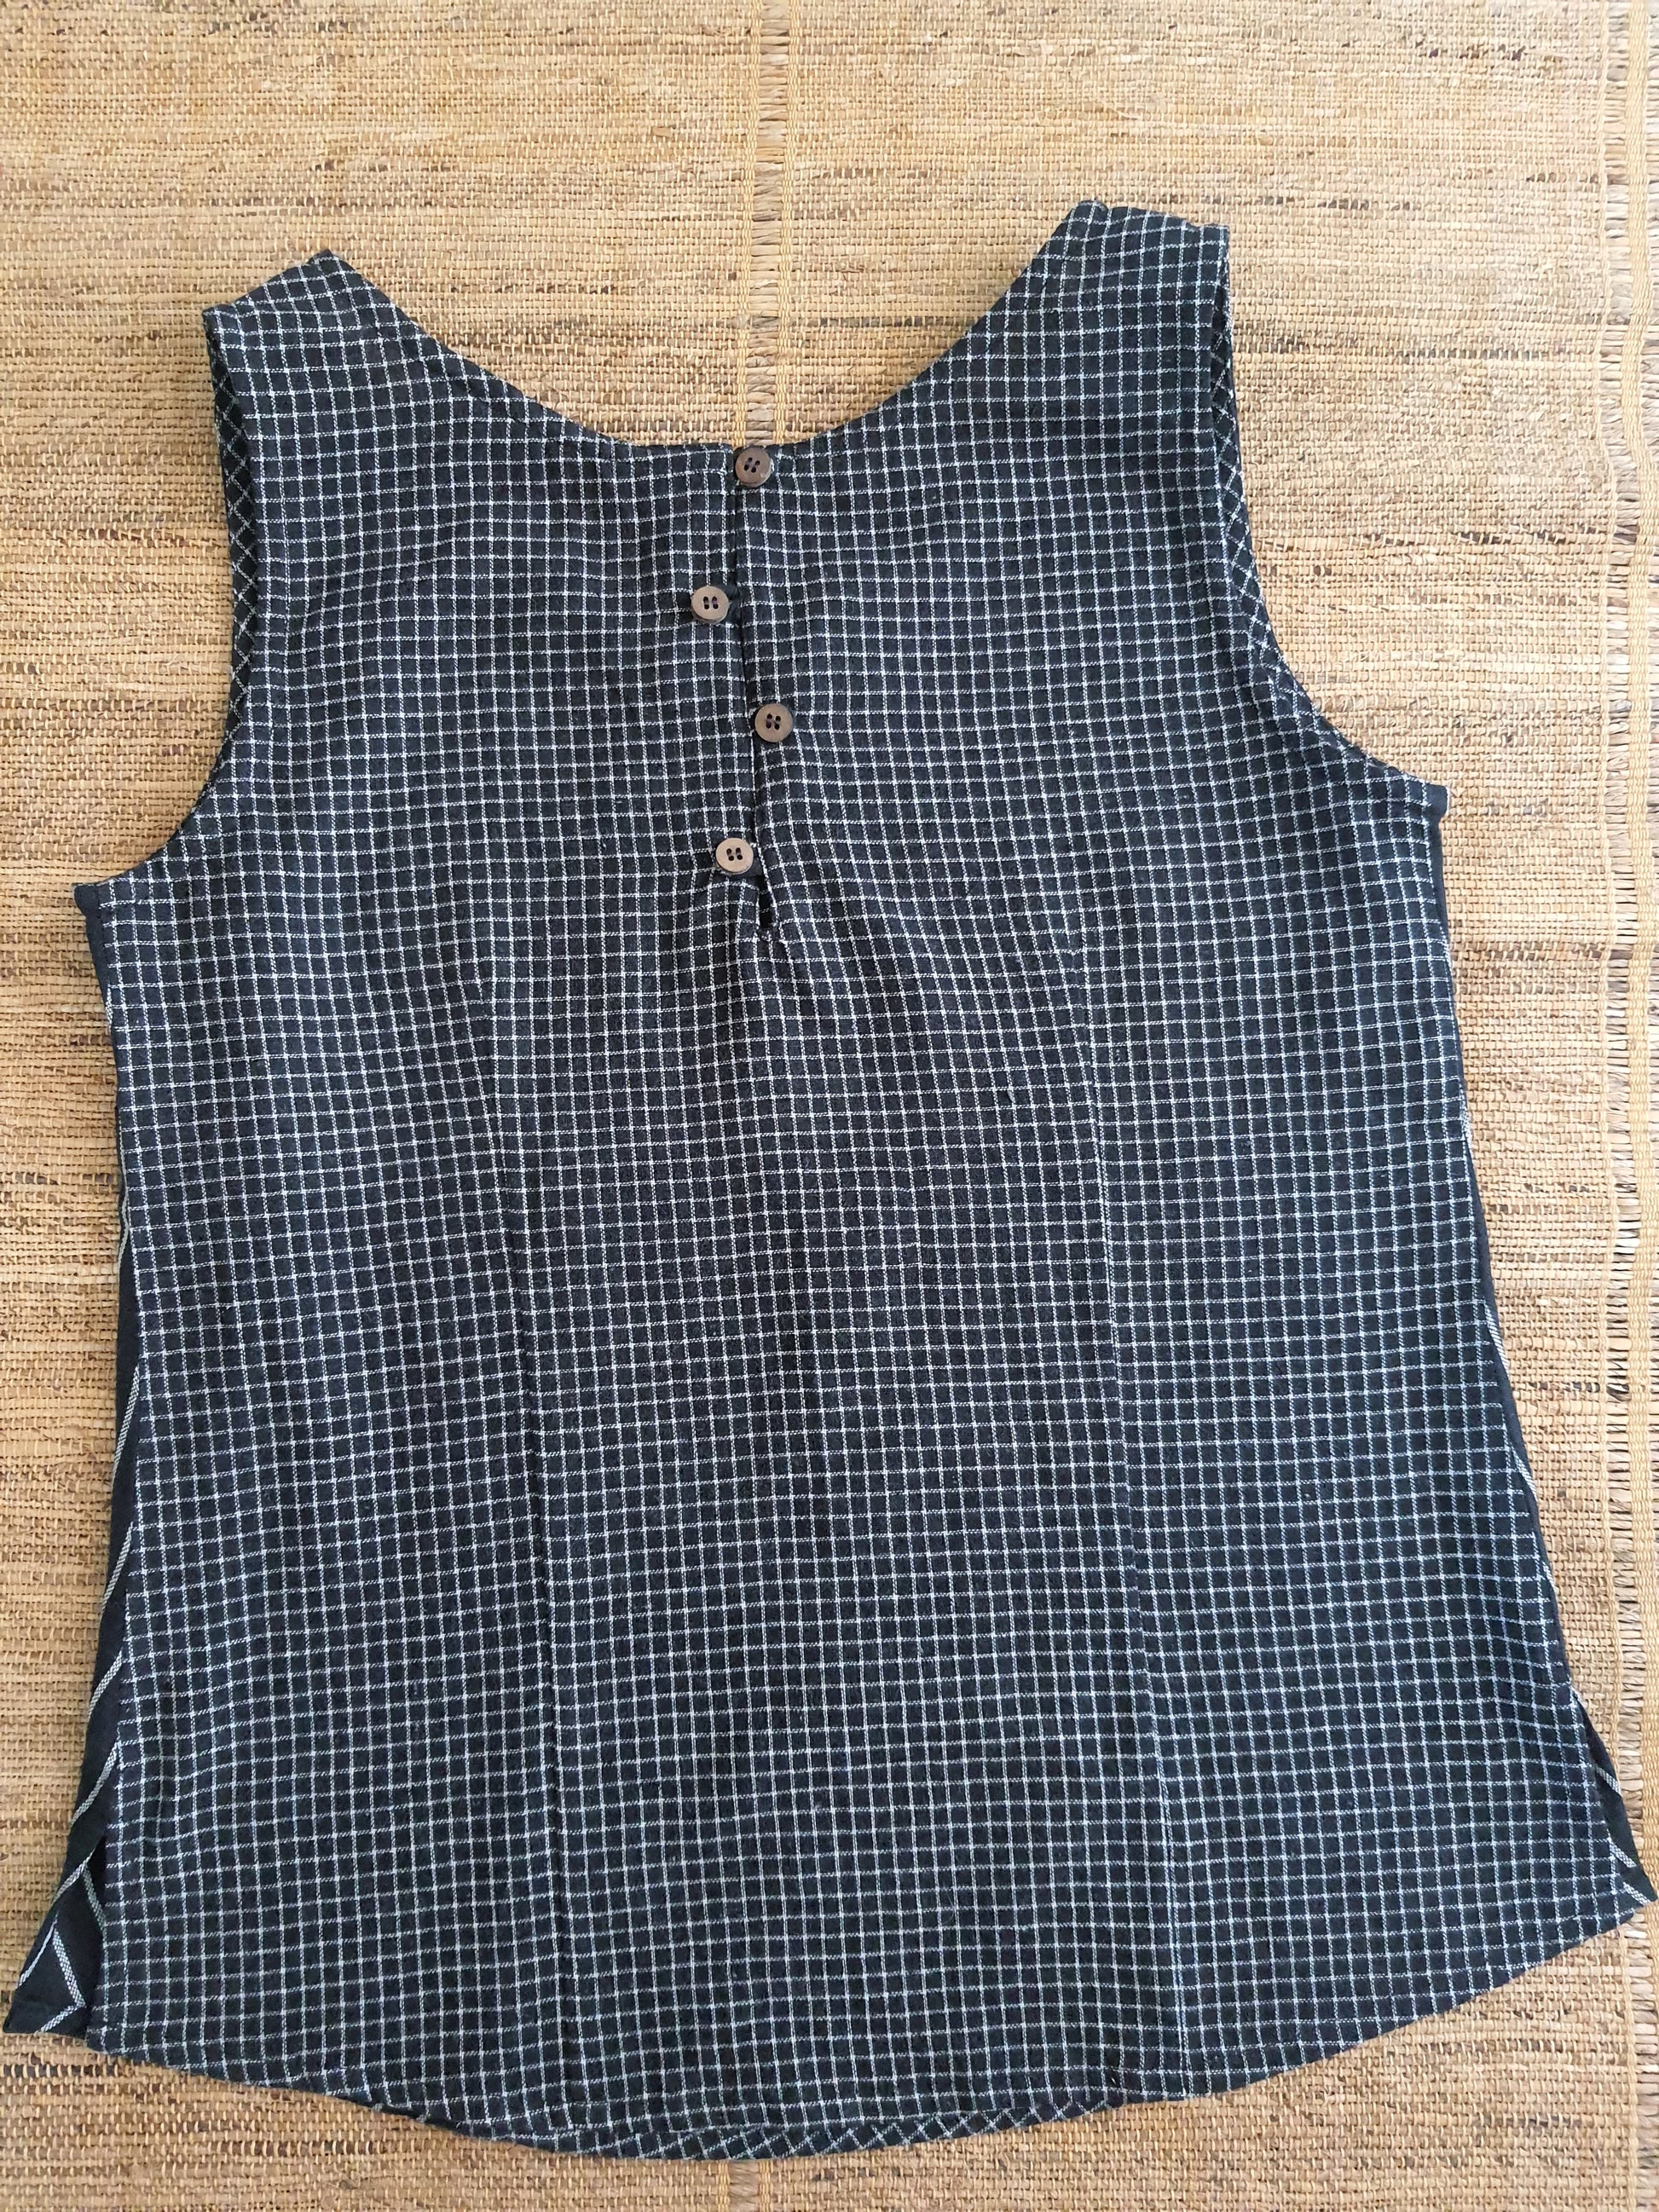 Image of the back of the top. black white checks. loop and button detailing